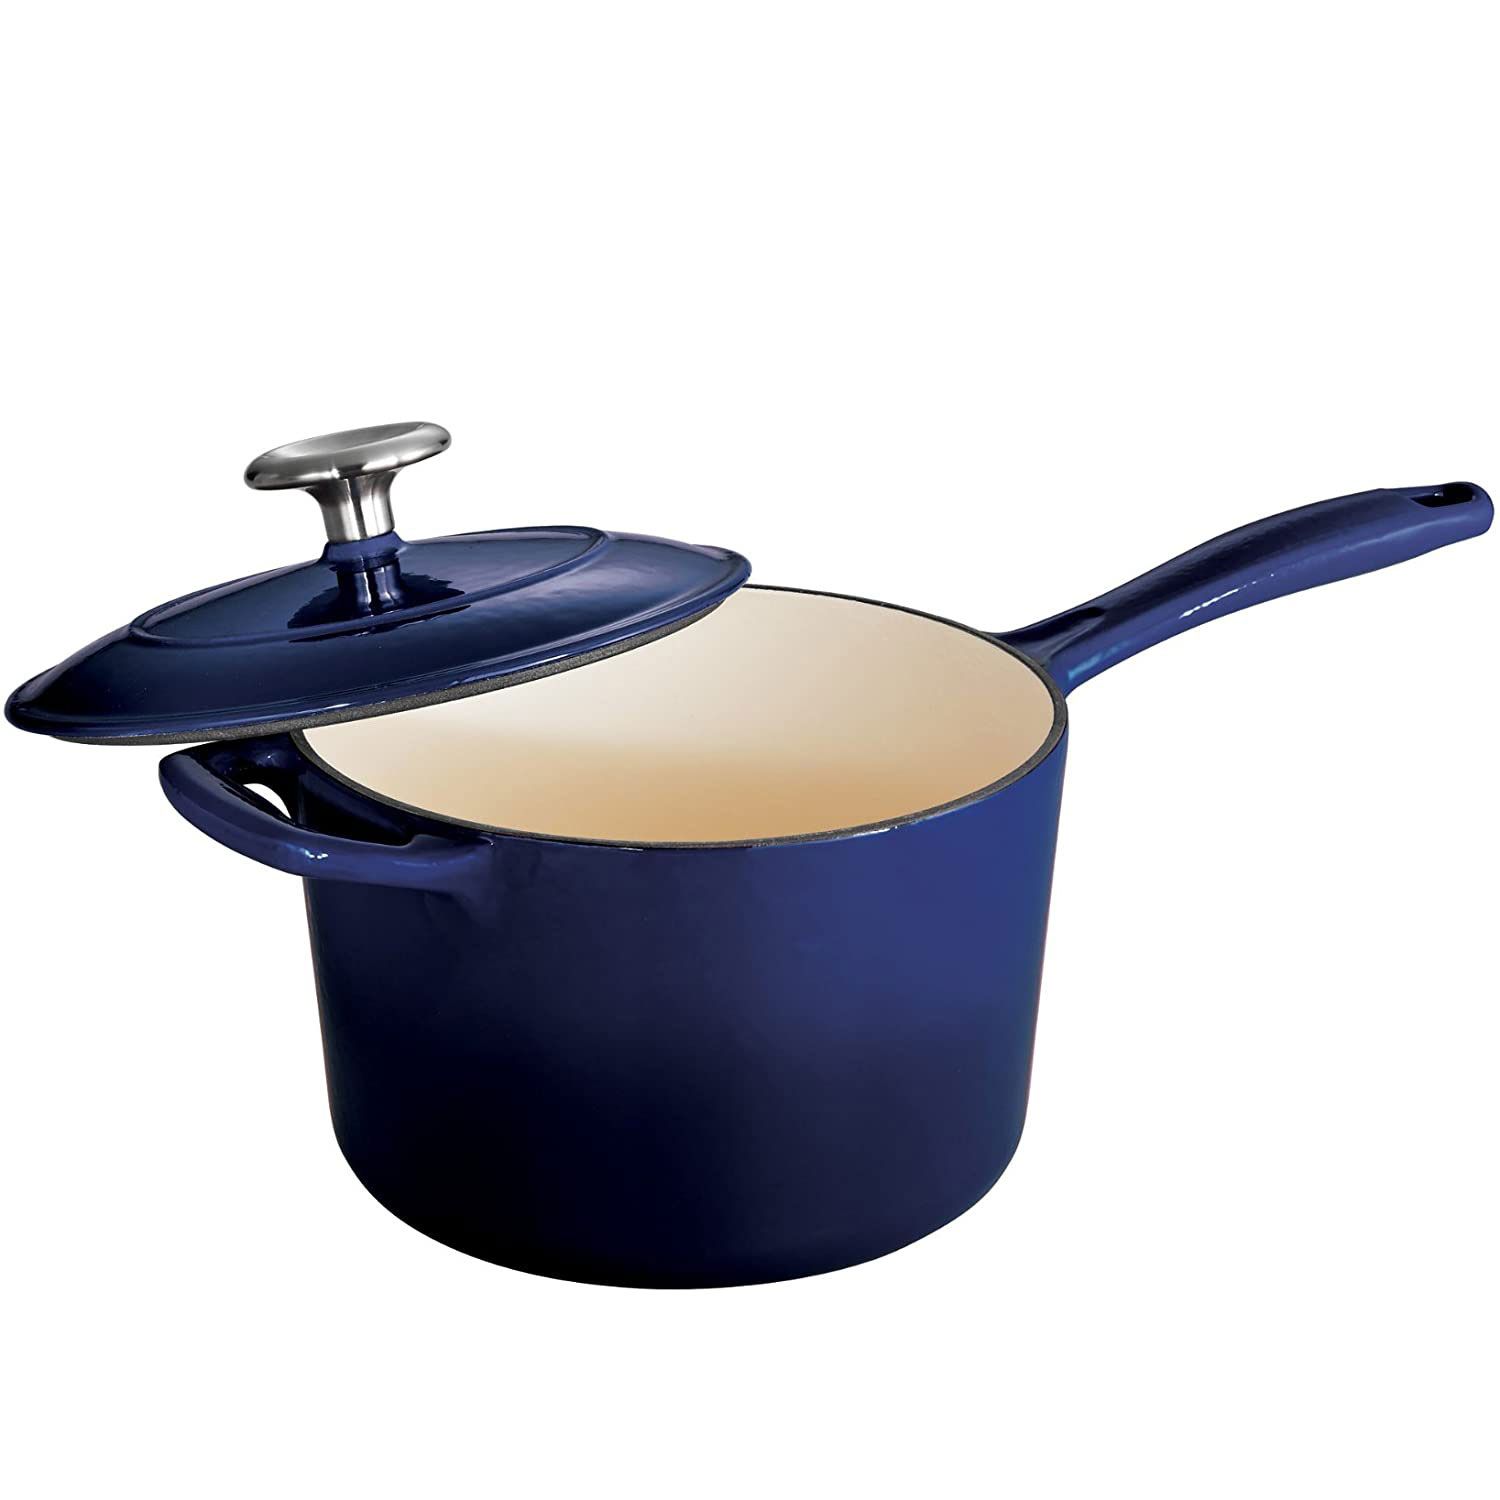 enameled cast iron saucepan with blue exterior